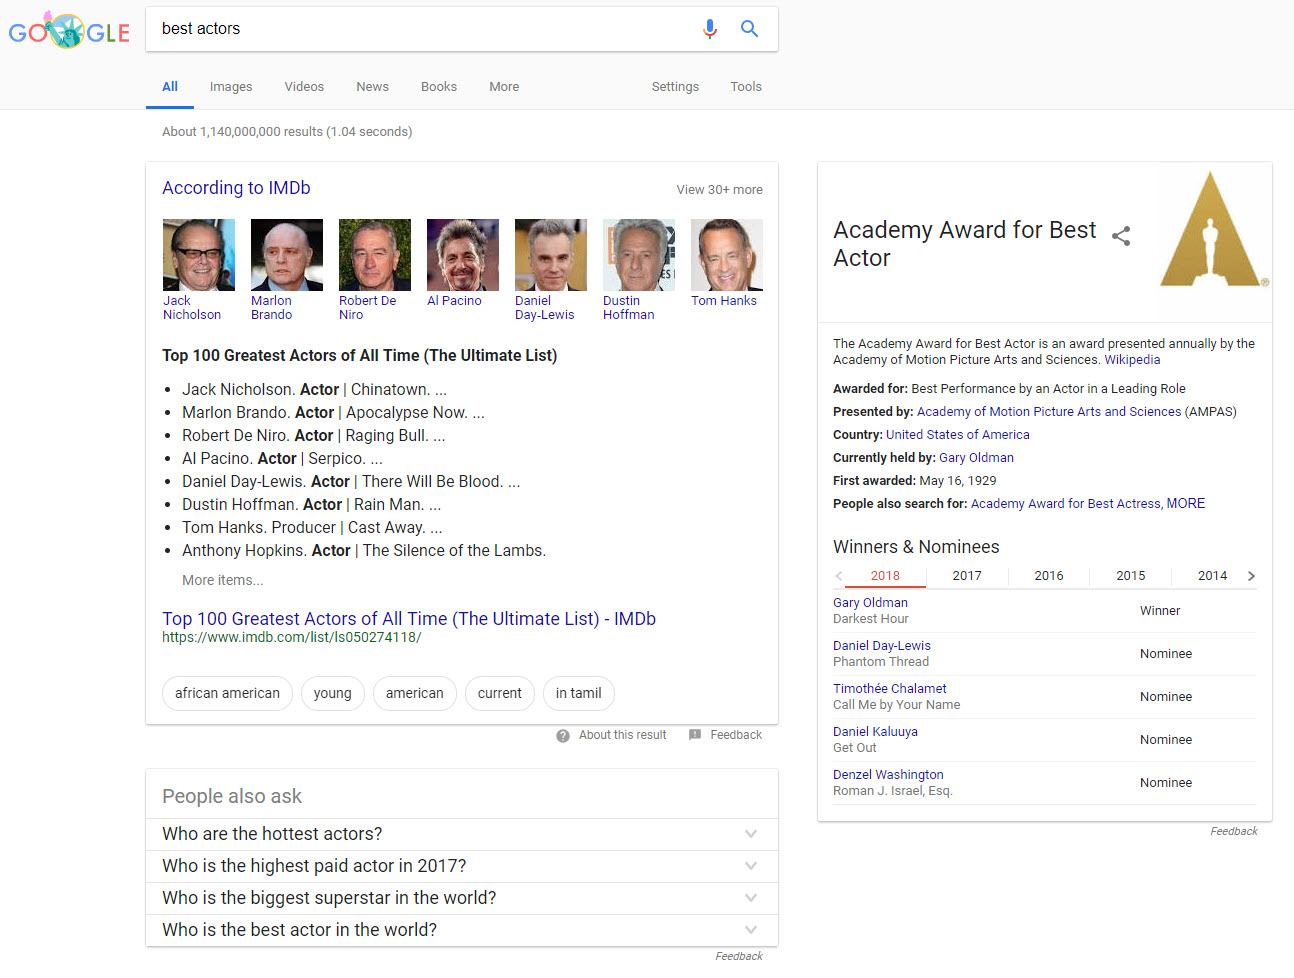 Best Actor - Featured Snippet and Carousel